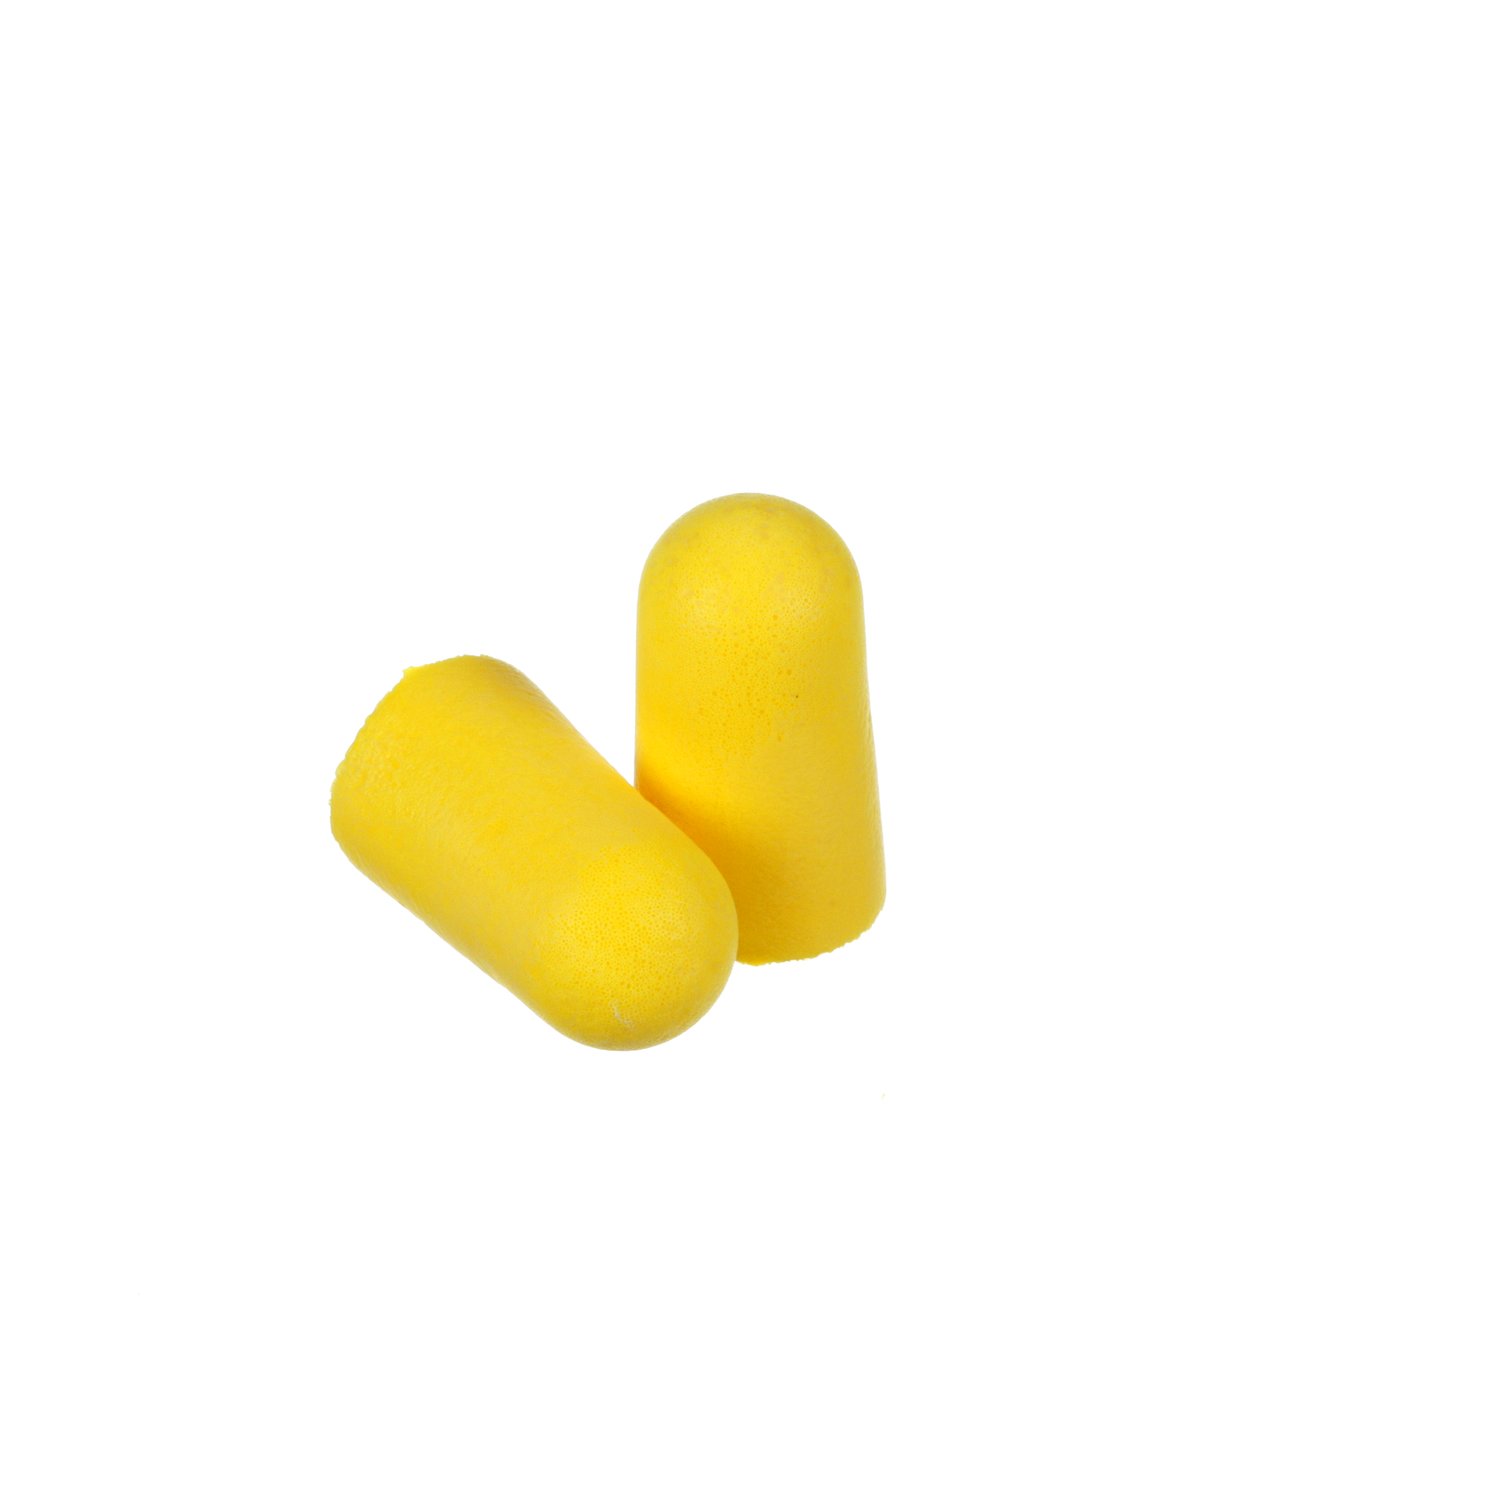 7000002311 - 3M E-A-R TaperFit 2 Earplugs 312-1221, Uncorded, Poly Bag, Large
Size, 2000 Pair/Case